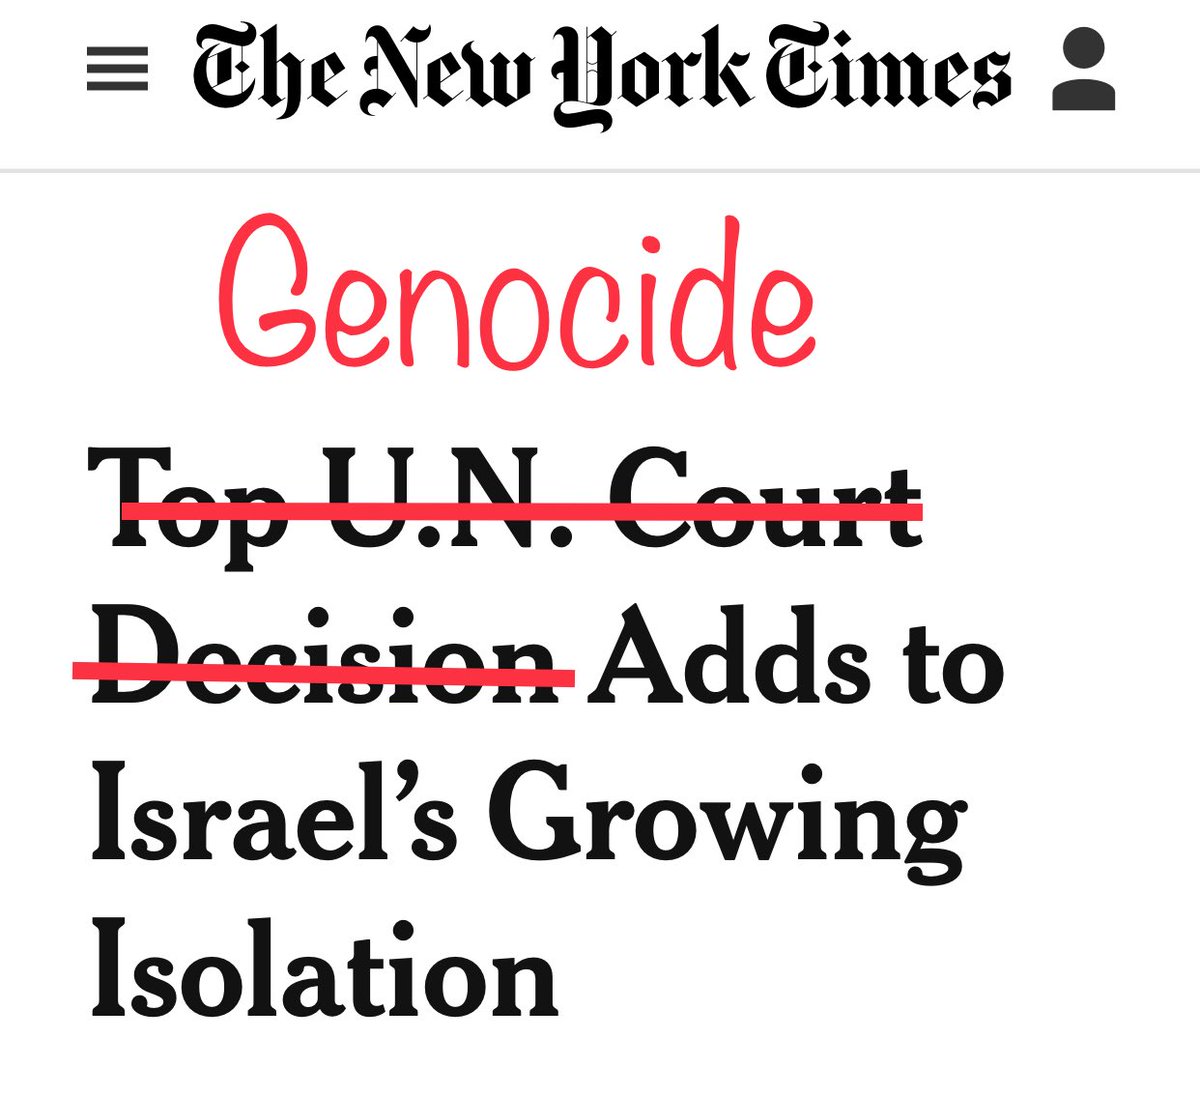 Stop blaming everyone but Israel’s own actions, namely committing a genocide, for the consequences